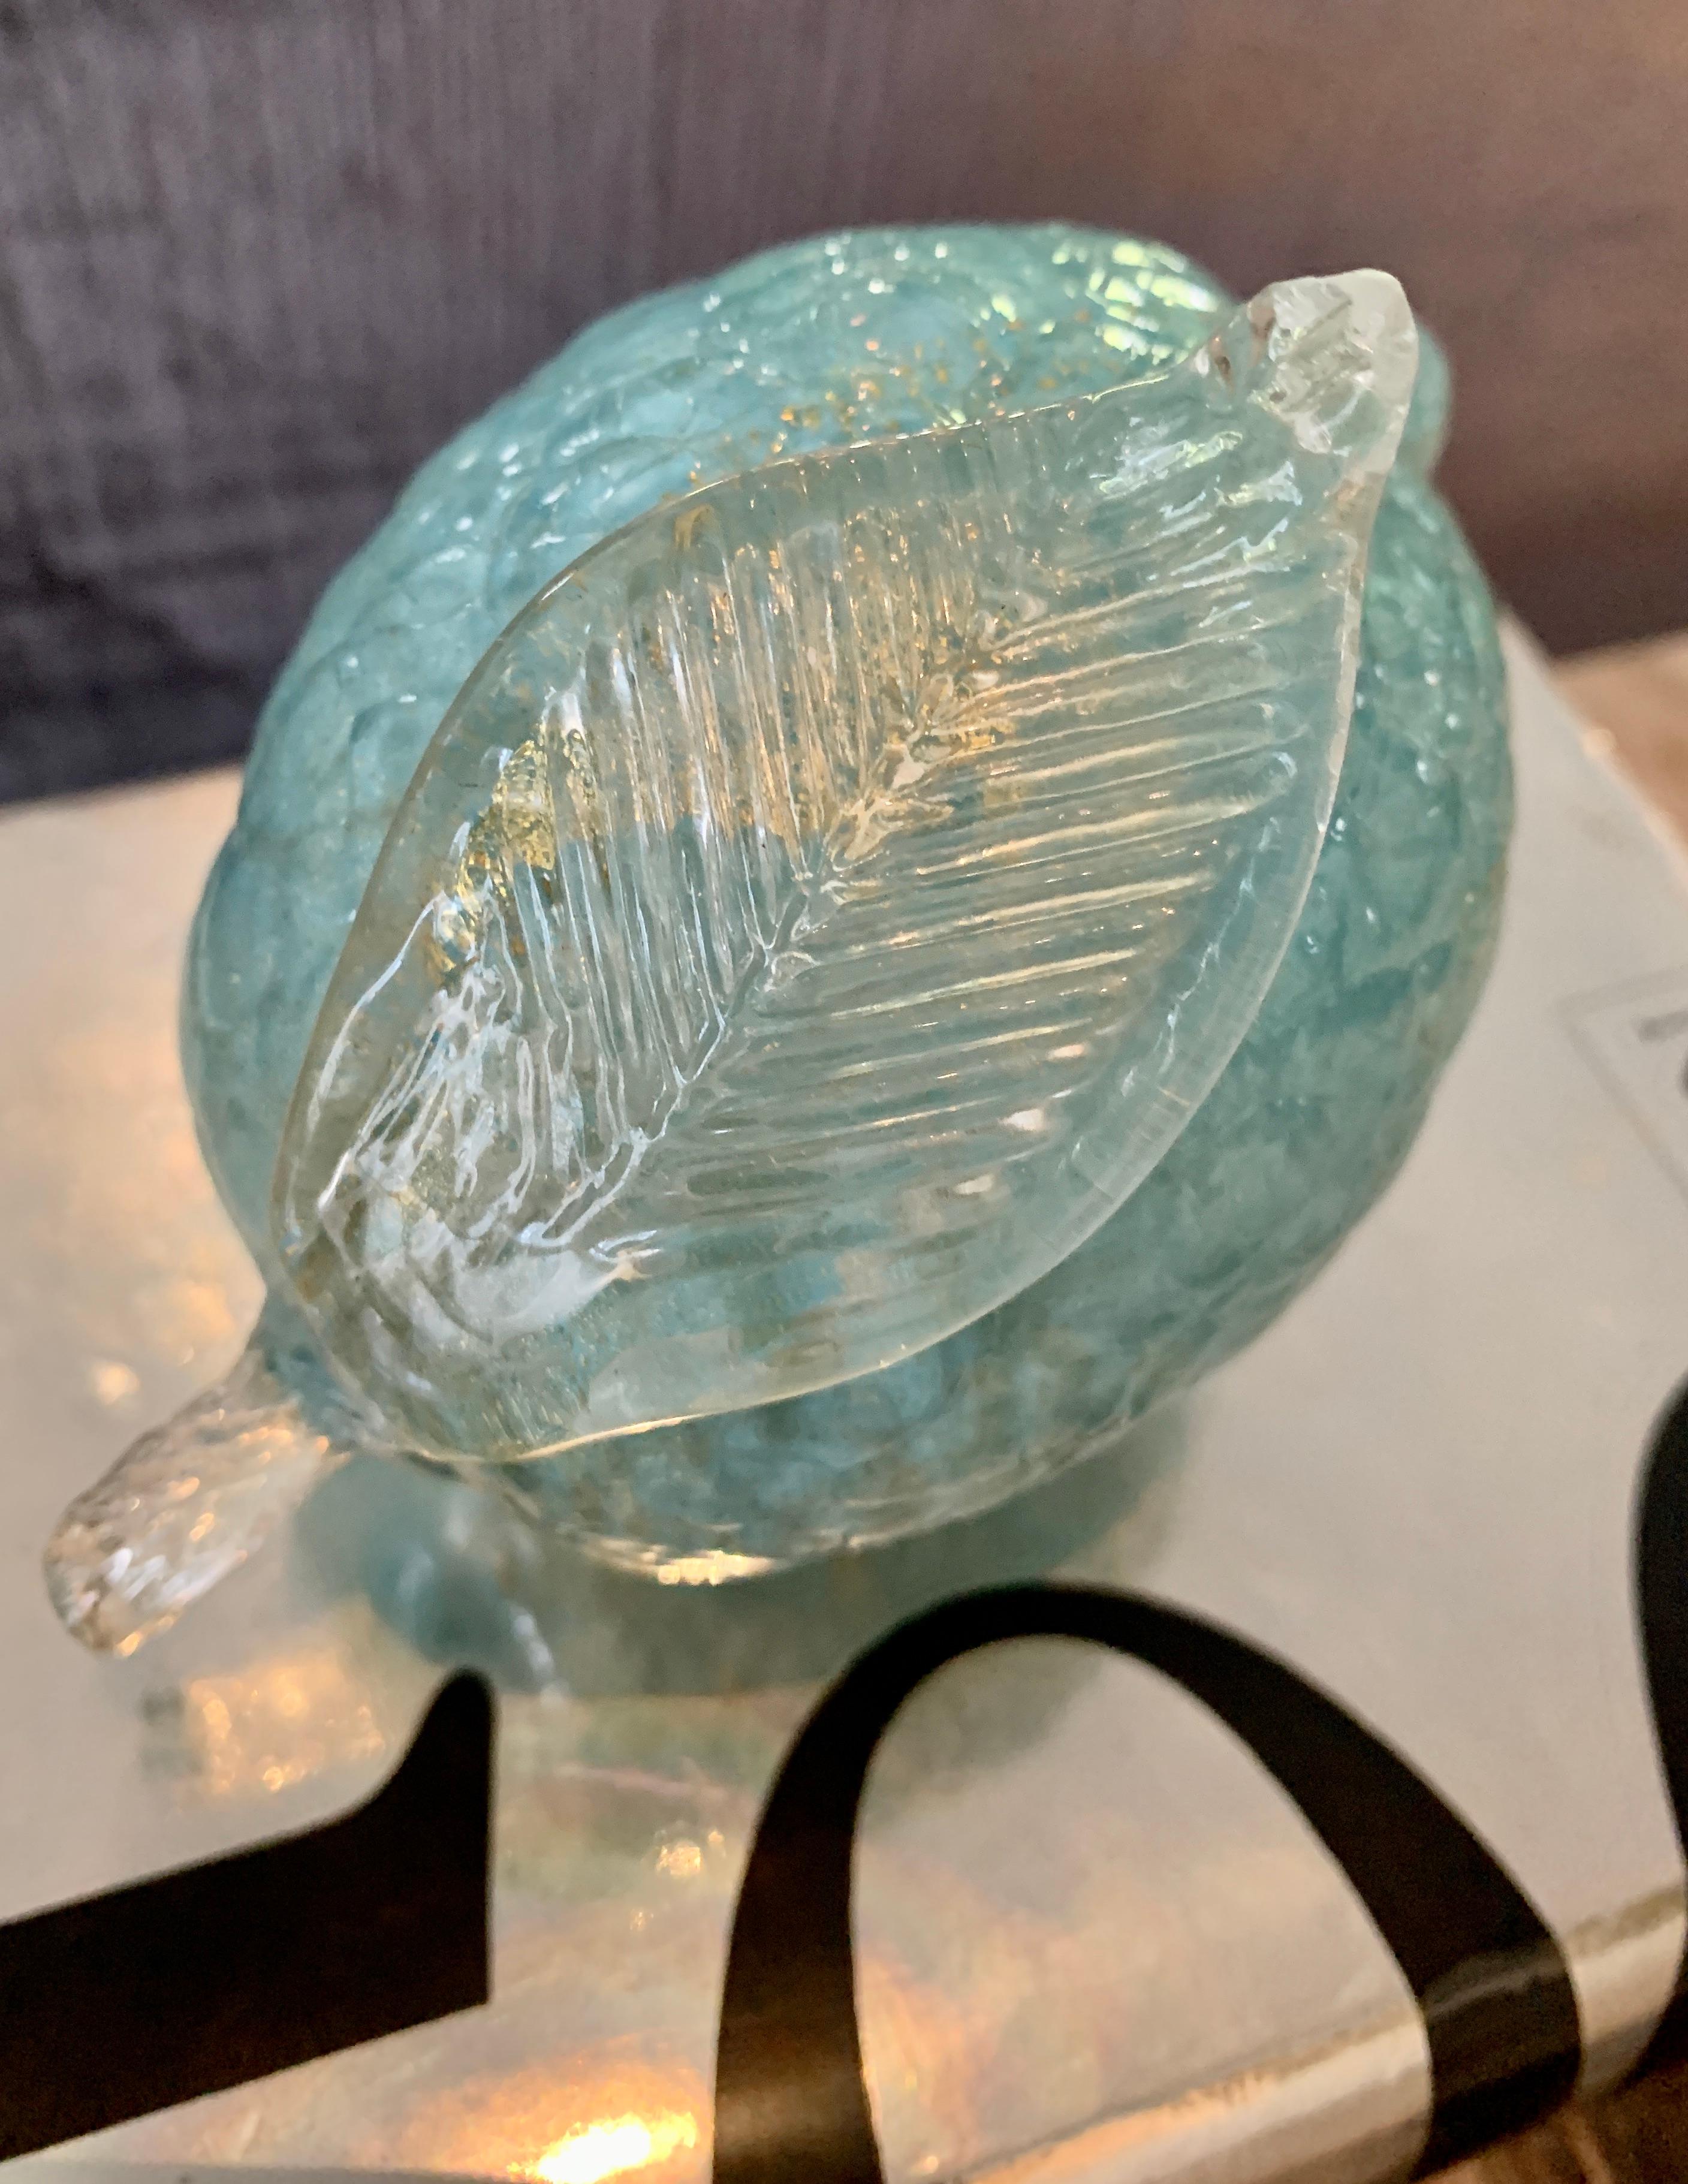 Tiffany blue and gold Murano lemon paper weight, a stunning paper weight or decorative object... The wonderful blue shade and details with gold make a show stopper.